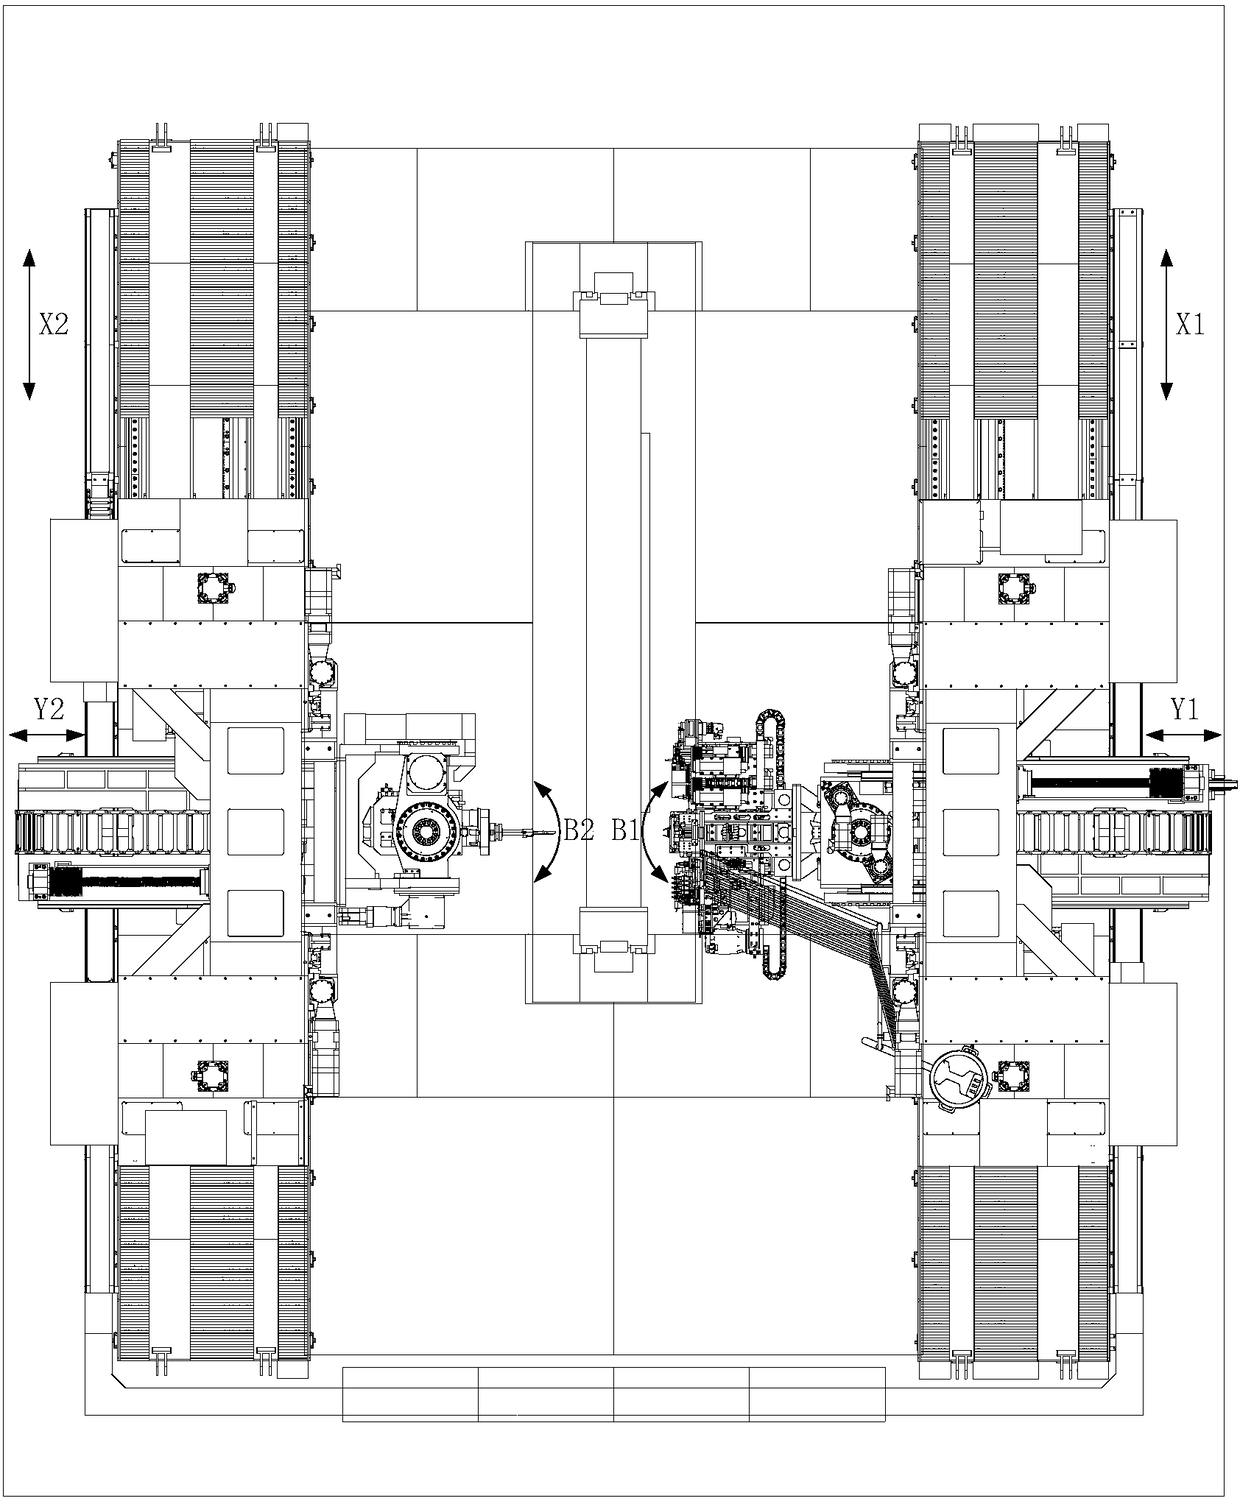 A base coordinate system calibration method for an aircraft panel horizontal automatic drilling and riveting machine